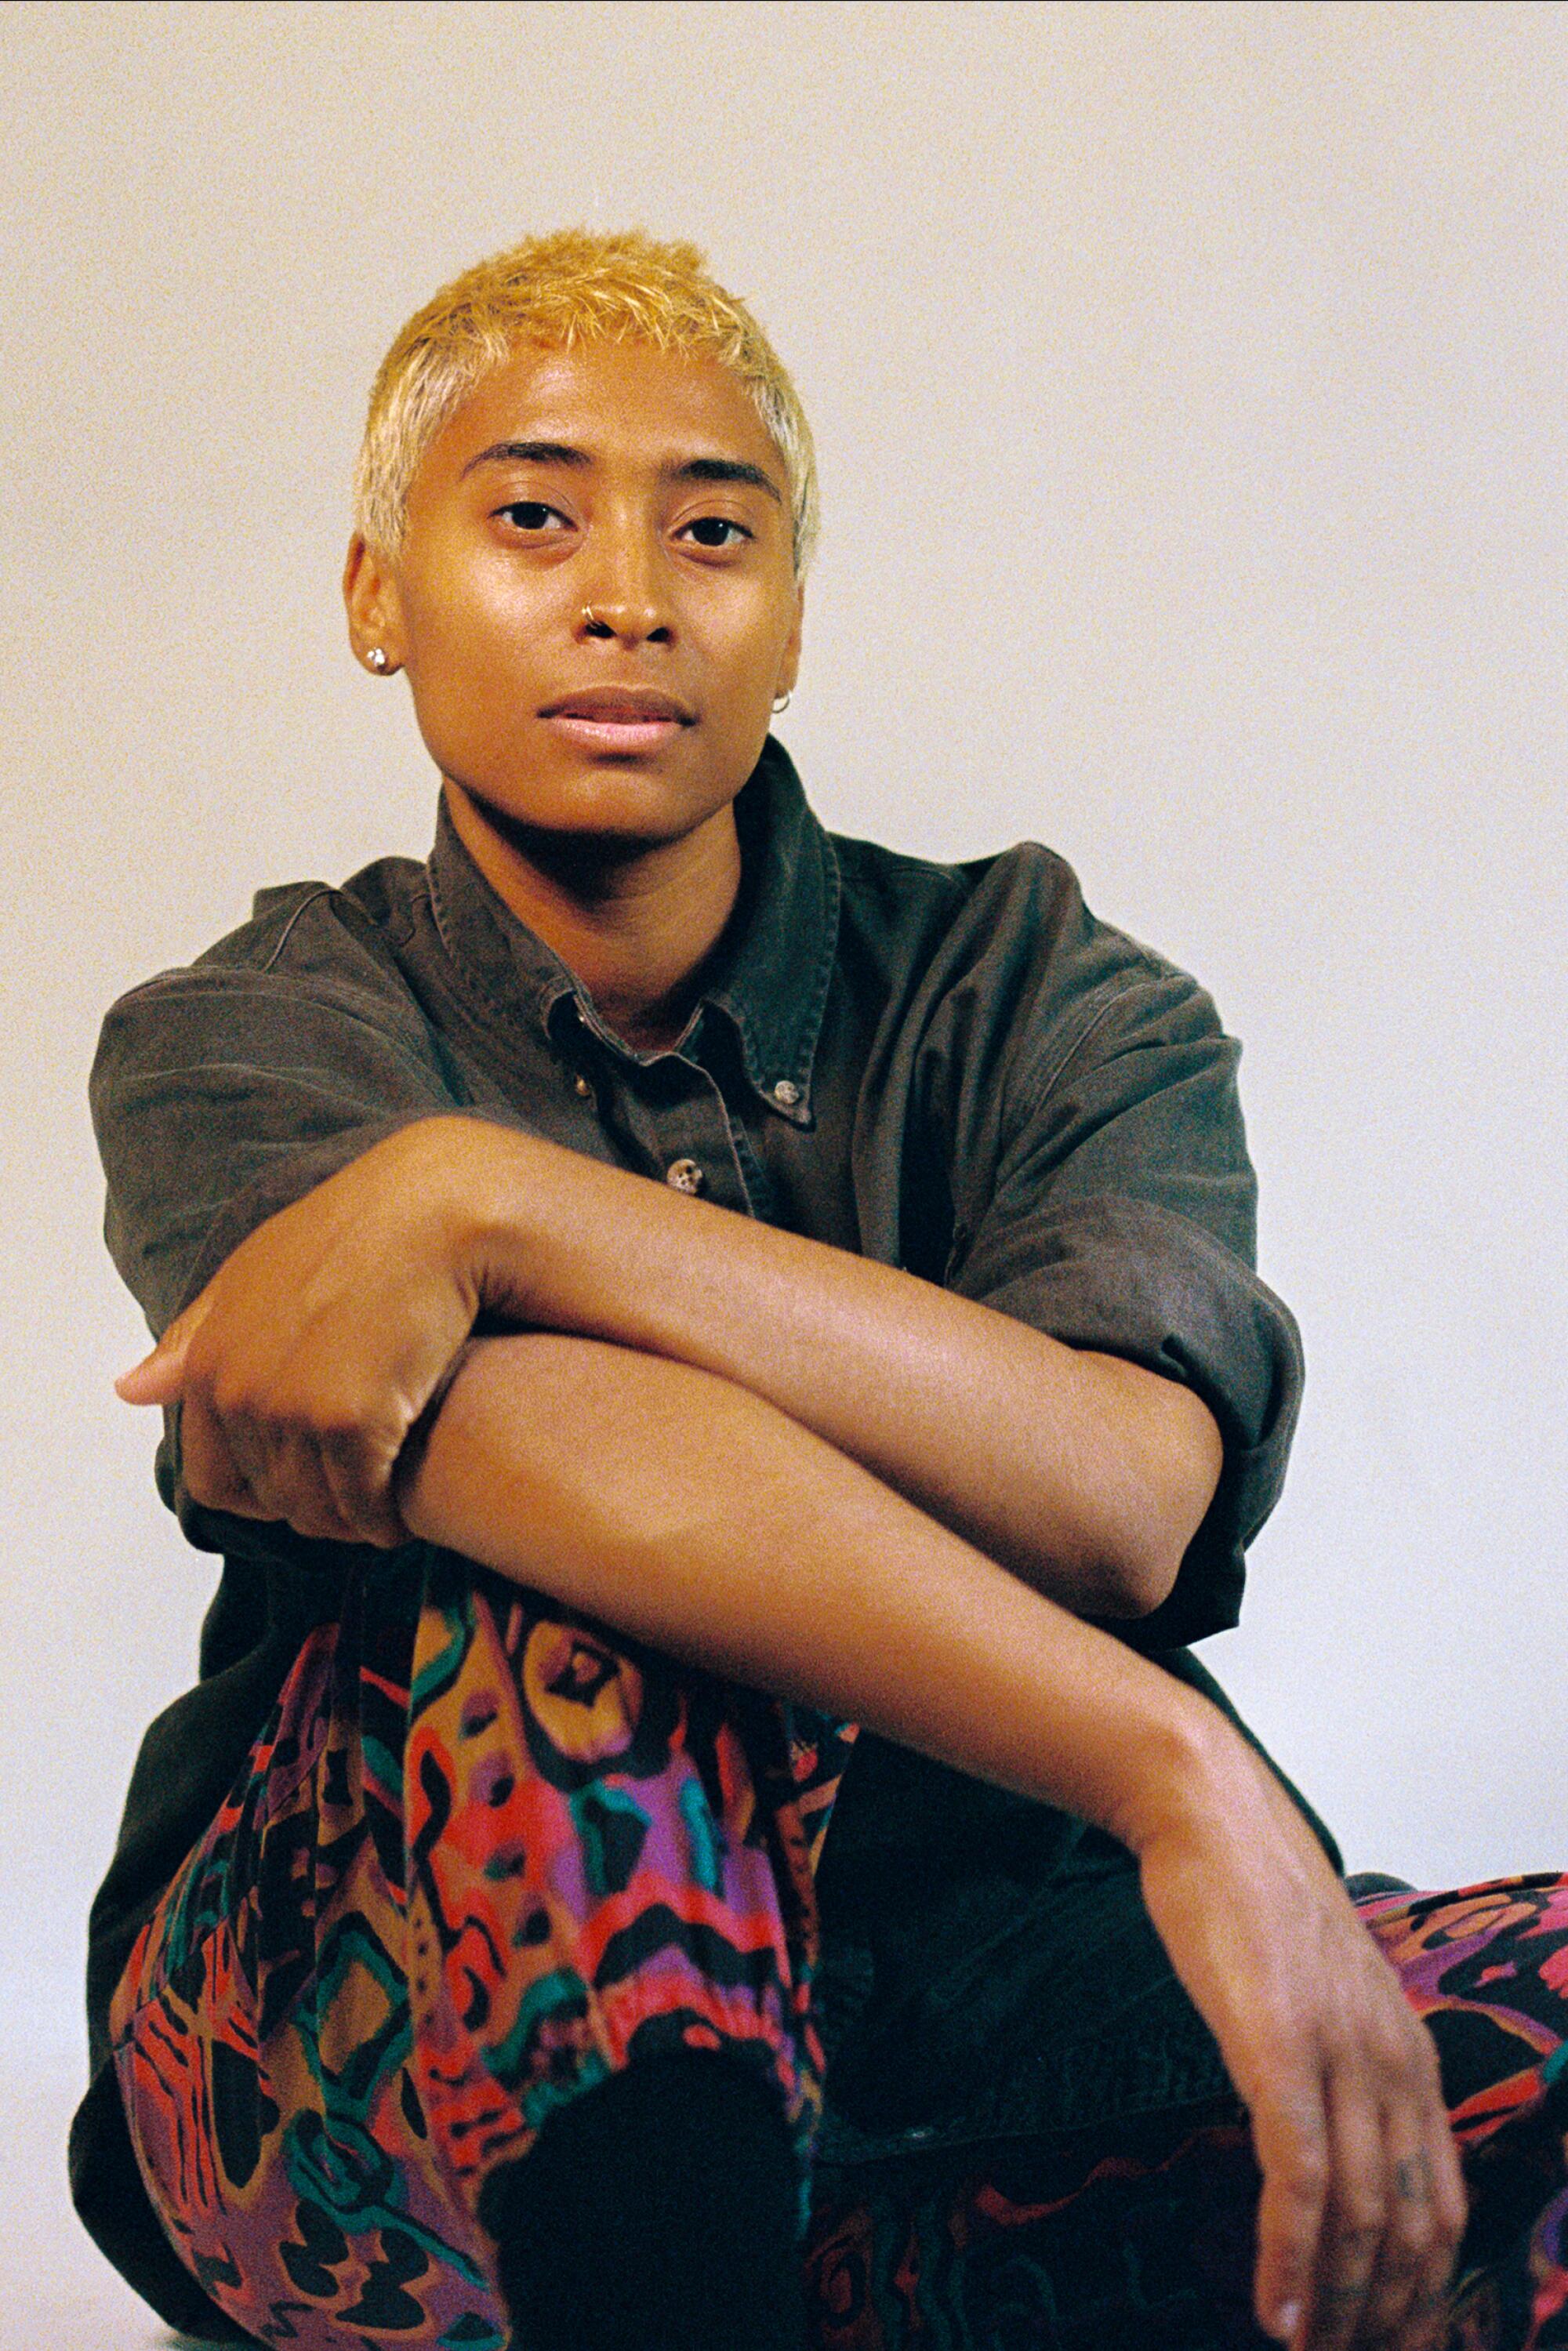 Anita Obasi (she/her) creator of Sapphic LA curates lesbian and queer events in LA that center around Black folks